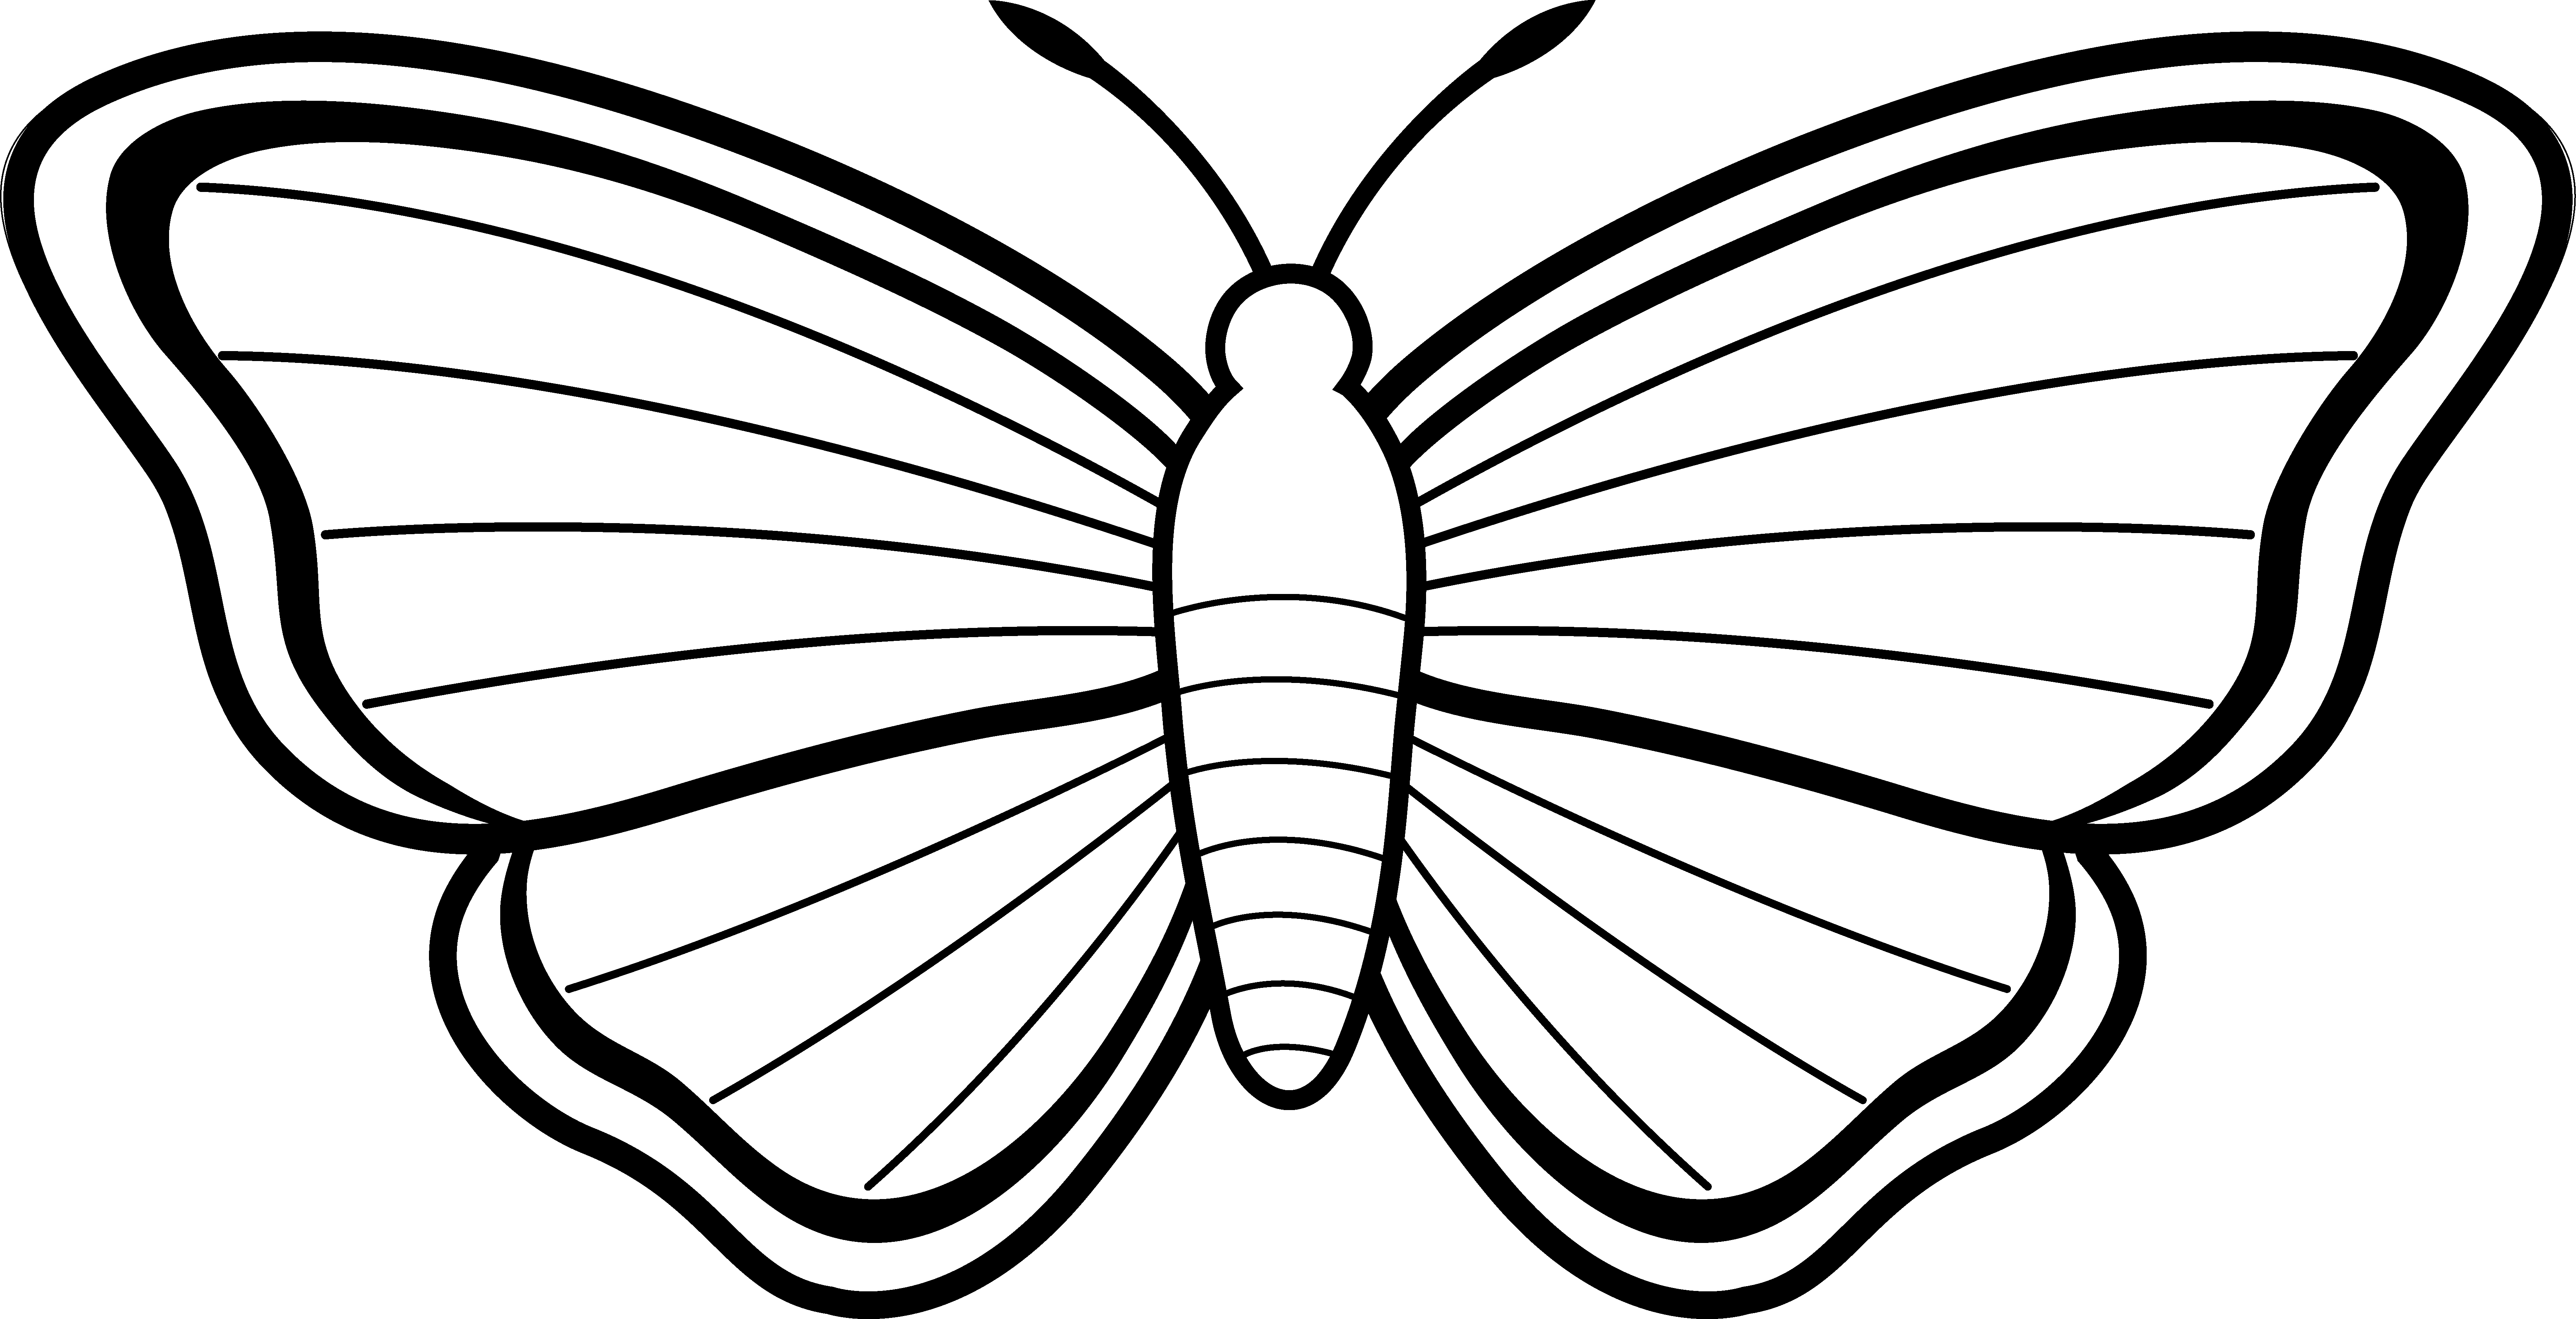 butterfly clipart black and w